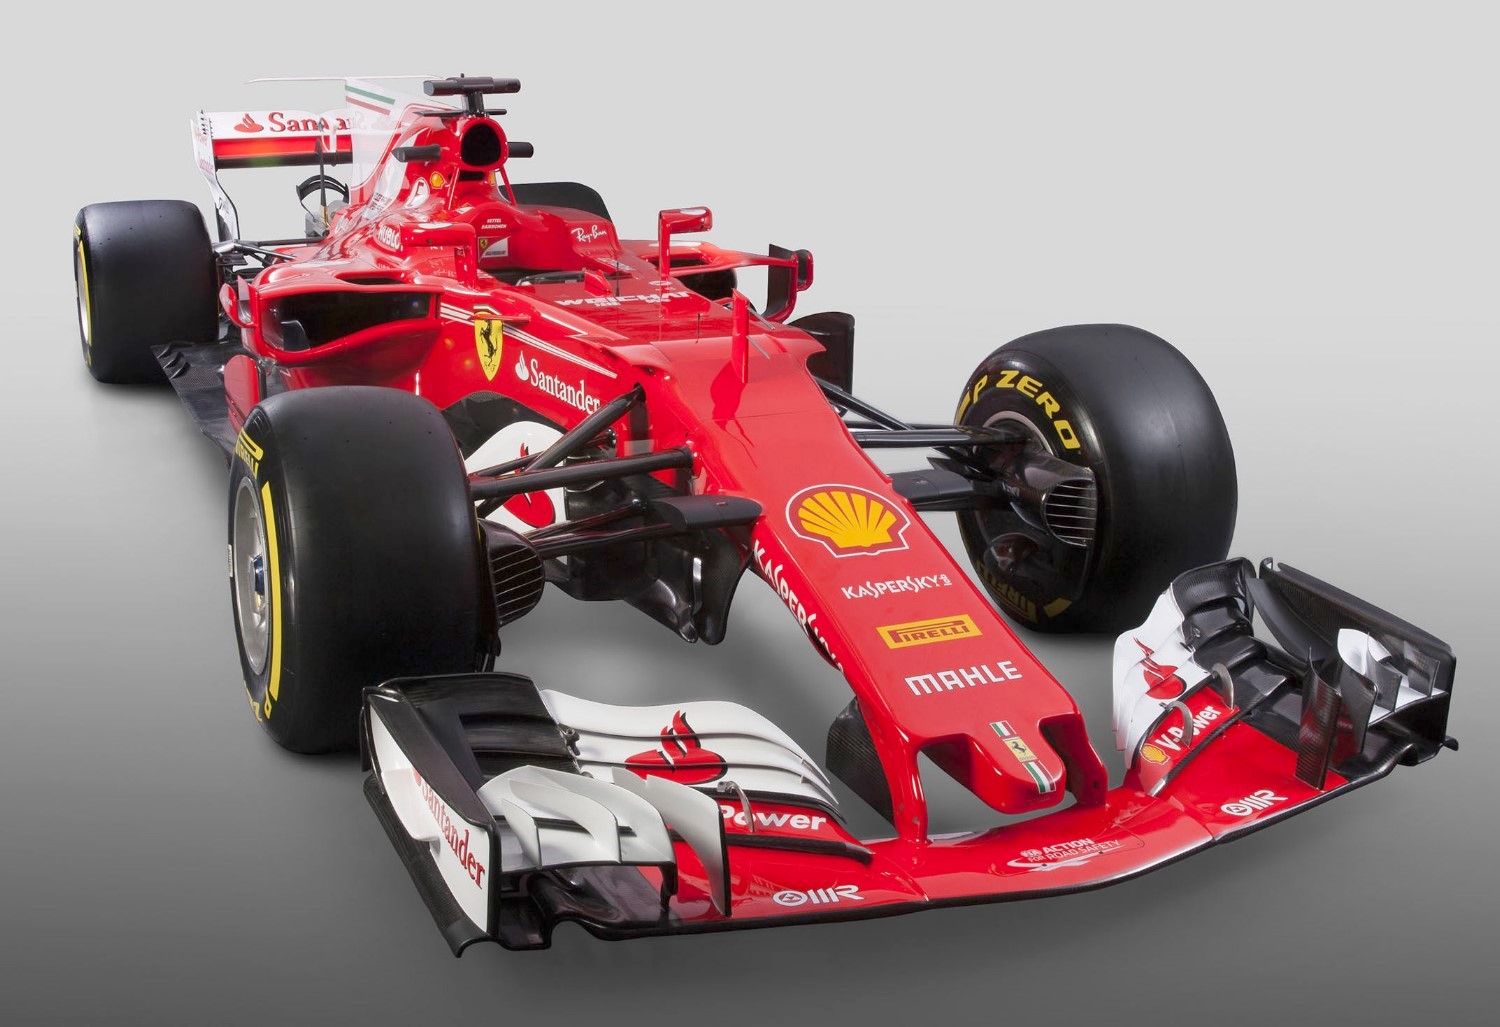 Will the new Ferrari be faster than this 2017 model?